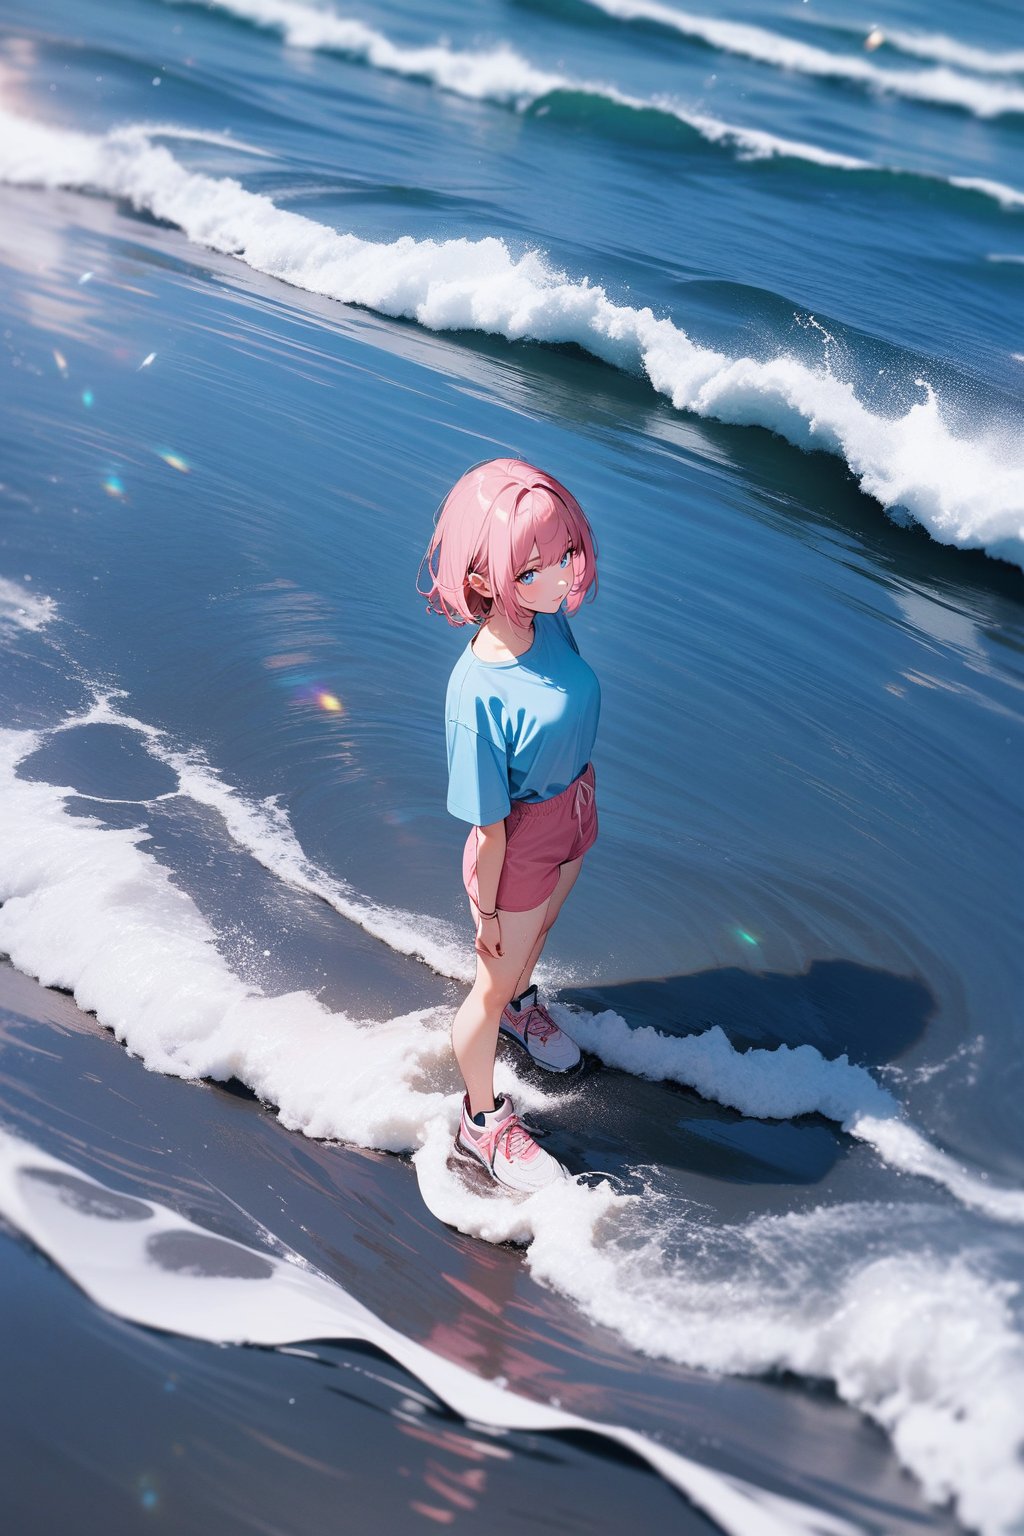 [1girl: 3], [pale: 3], [pink hair: 3], [short hair: 3], [hair between eyes: 3], [blue shirt: 3], [short sleeve: 3], [pink shorts: 3], [sneakers: 3], standing, on water, from above, masterpiece, best quality, absurdres, very aesthetic, newest, General